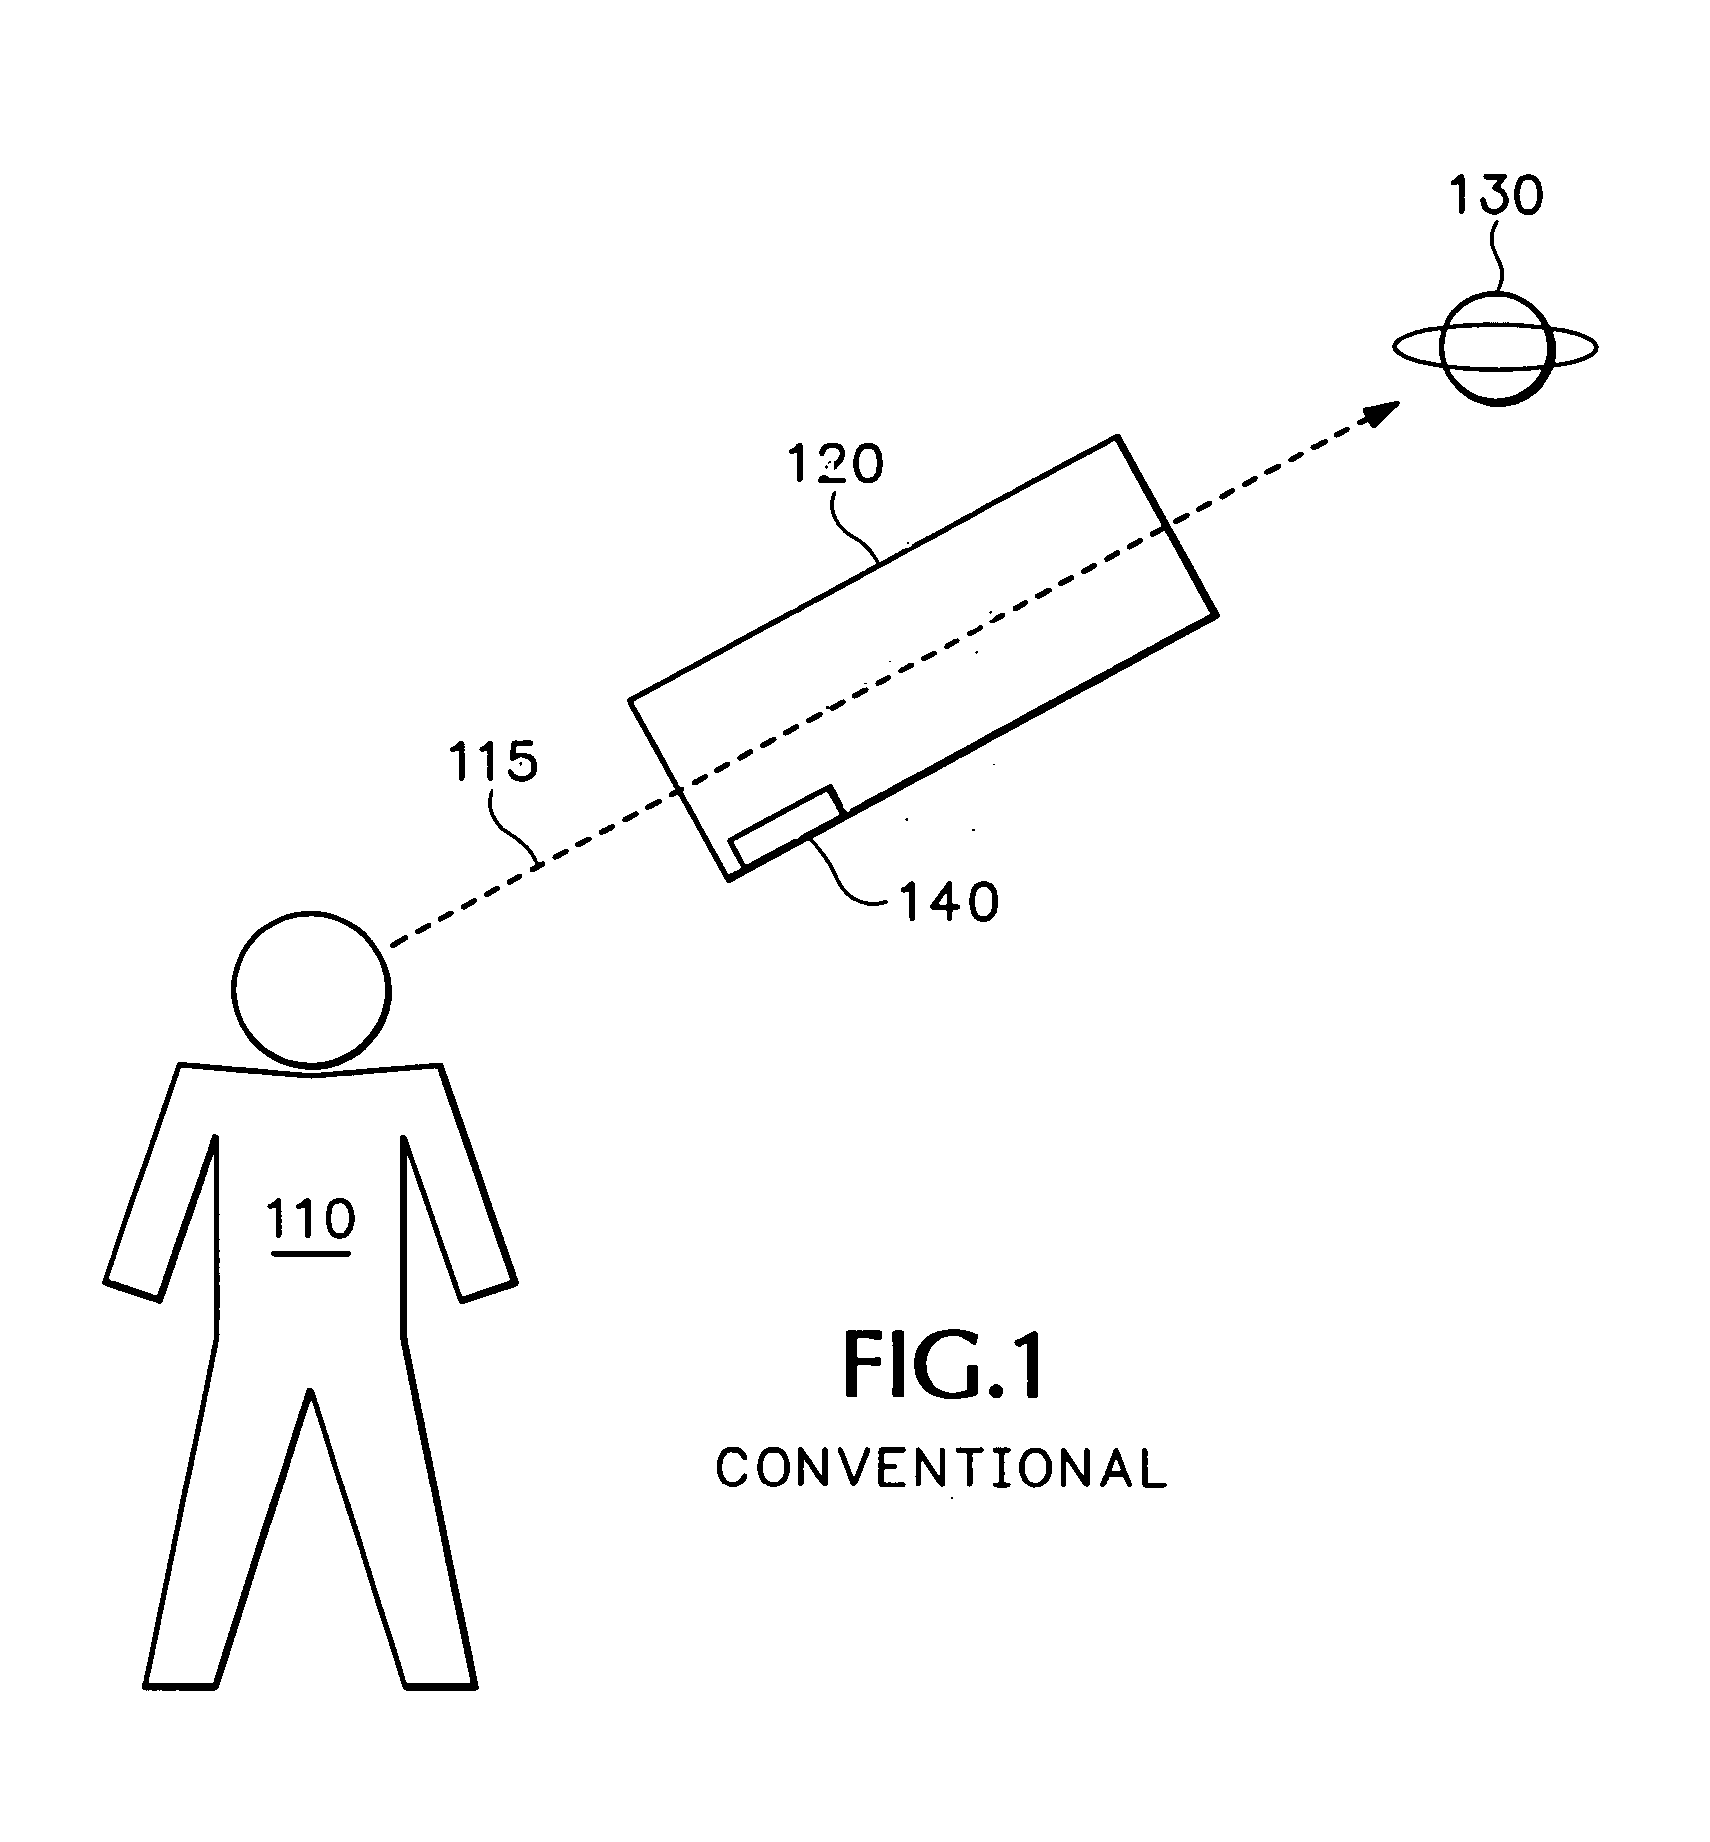 Laser guided celestial identification device